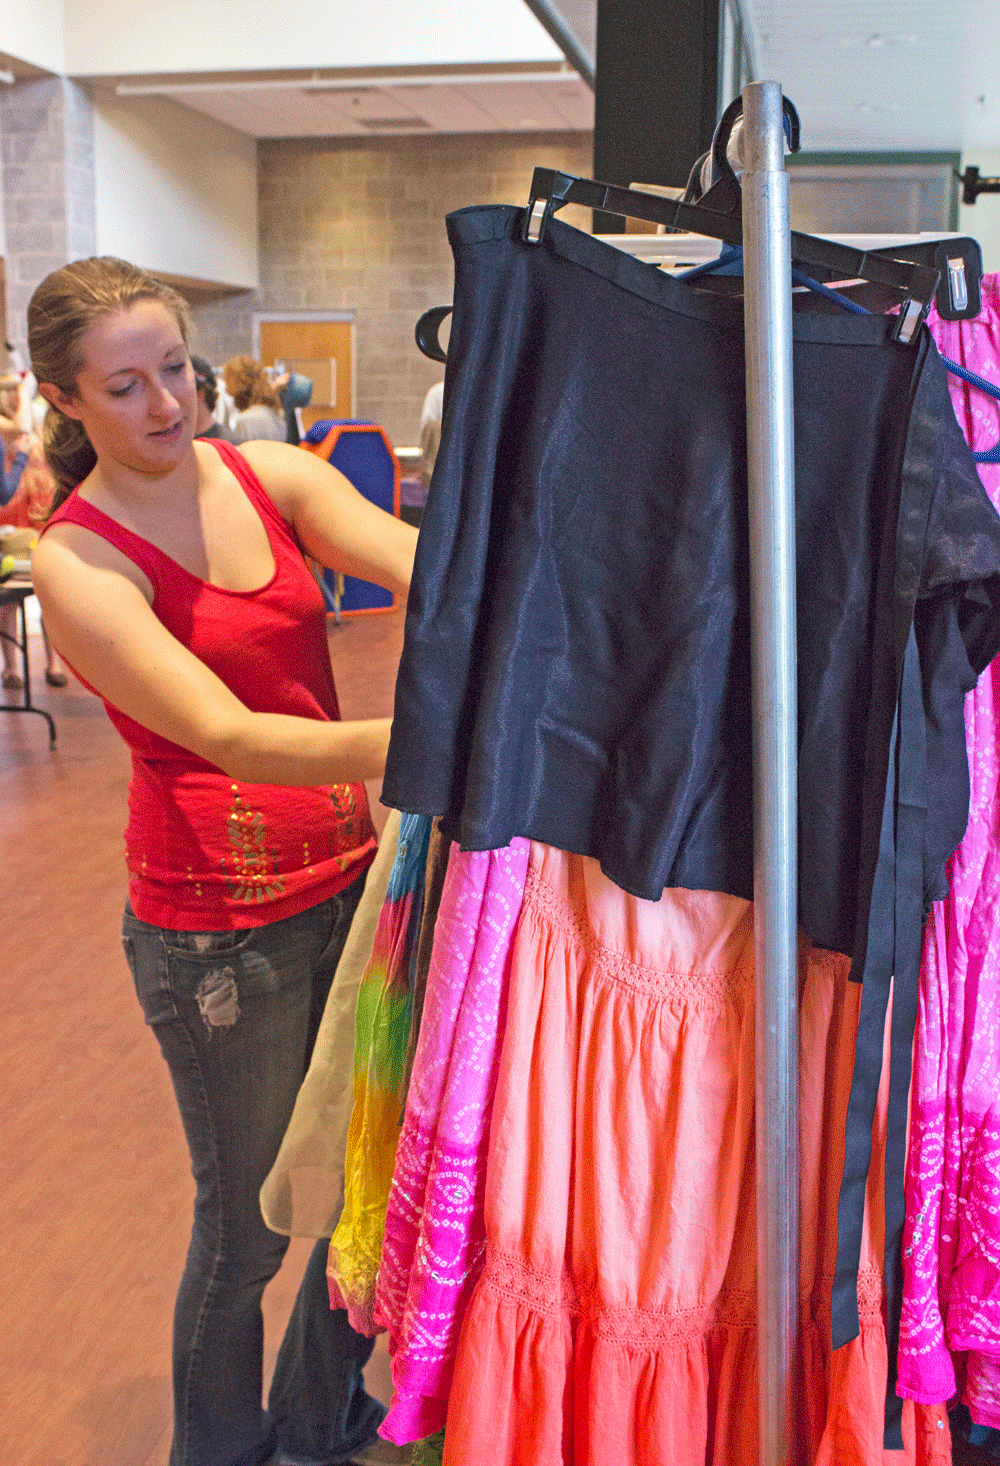 Senior theatre arts major Carmen Lawrence looking through costumes during the Tech Theatre Club’s annual costume sale in the Valborg Theatre on Friday afternoon in Valborg Theatre. Photo by Dallas Linger  |  The Appalachian